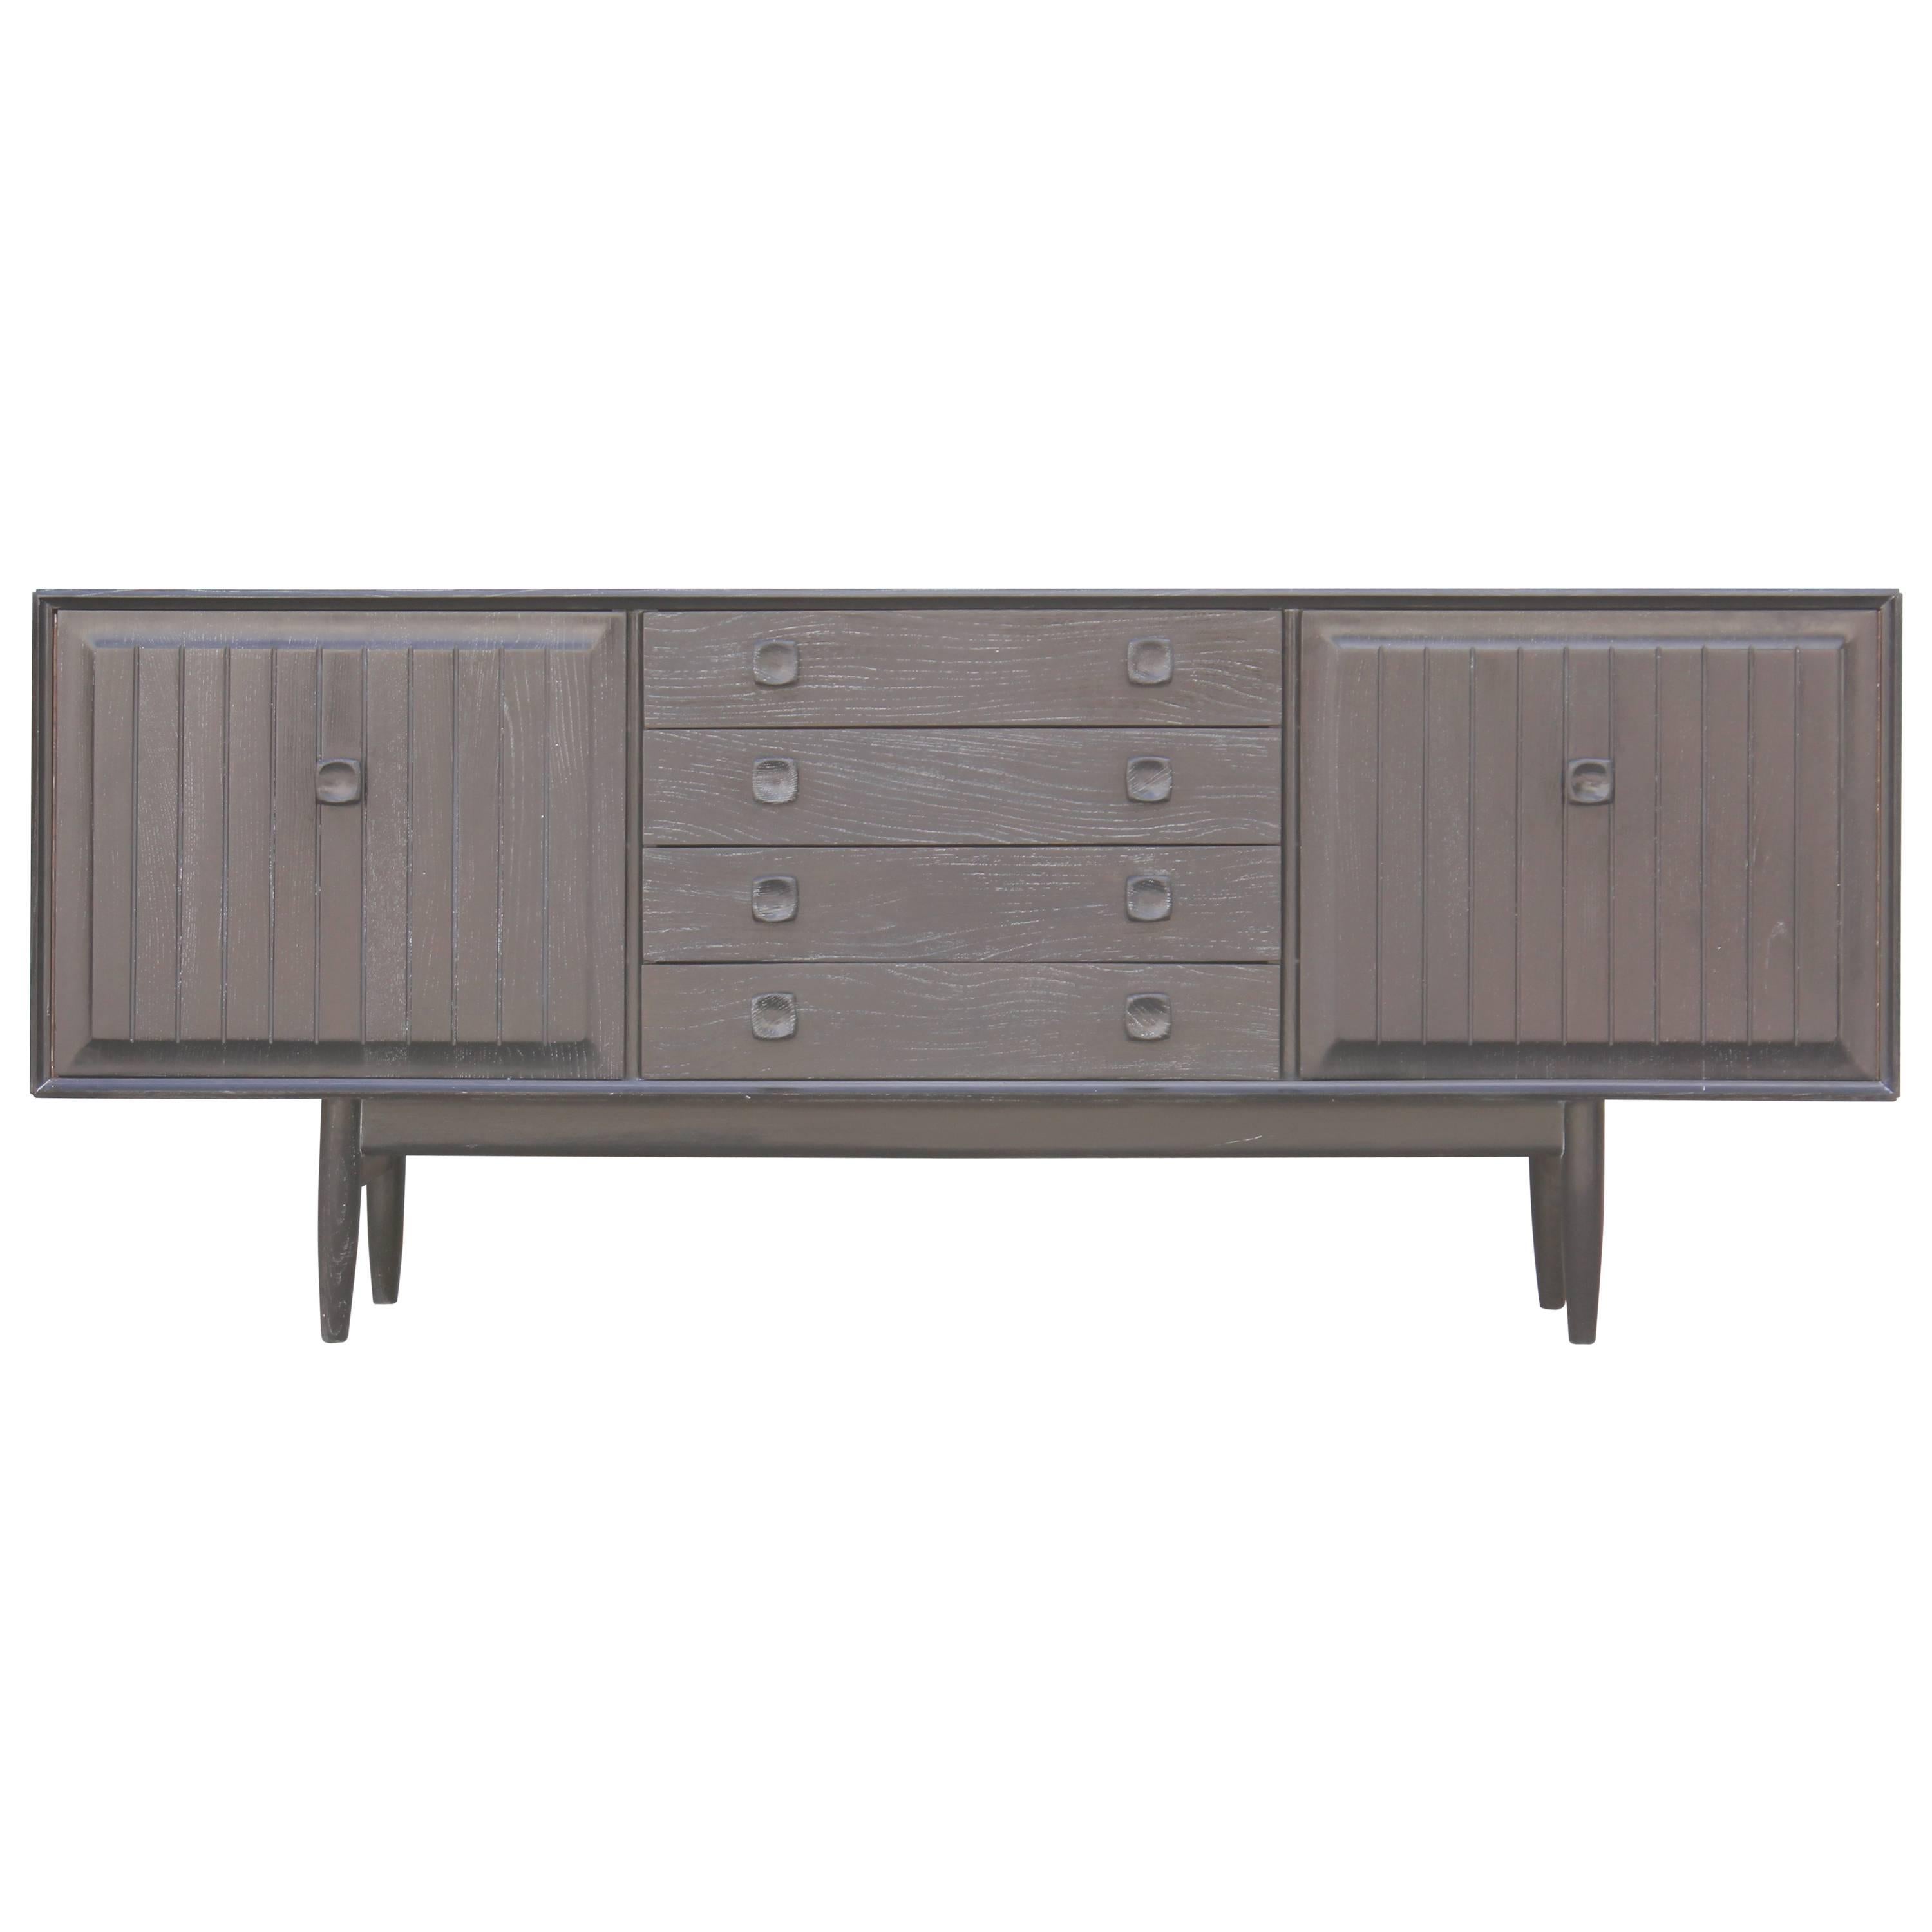 Modern Four-Drawer Credenza / Sideboard with a Cerused Finish